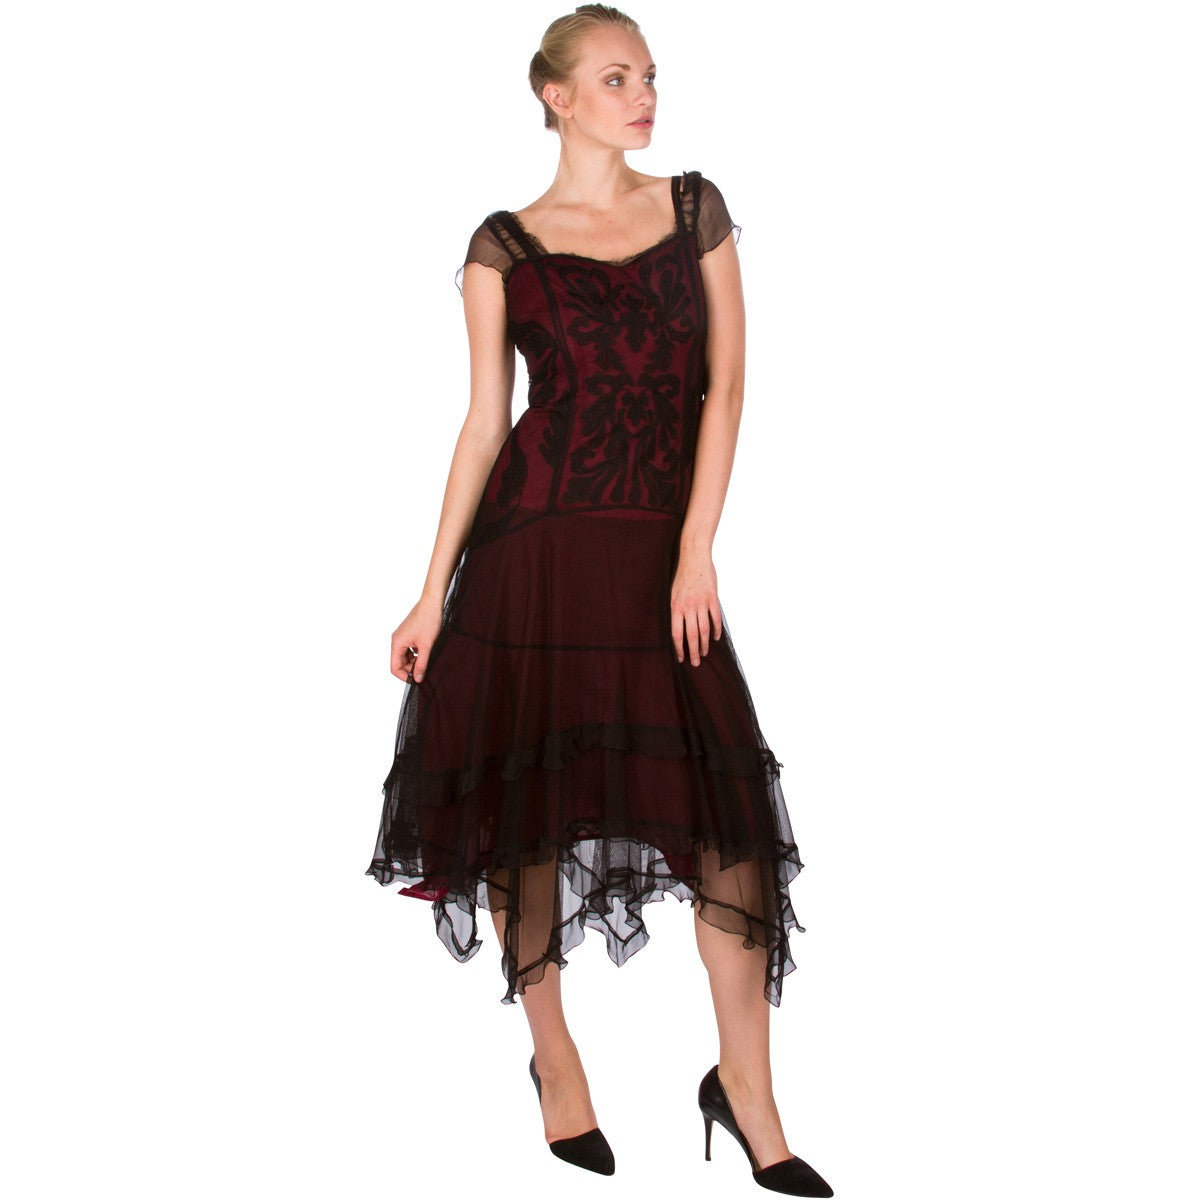 Romantic Vintage Inspired Party Dress in Wine by Nataya - SOLD OUT